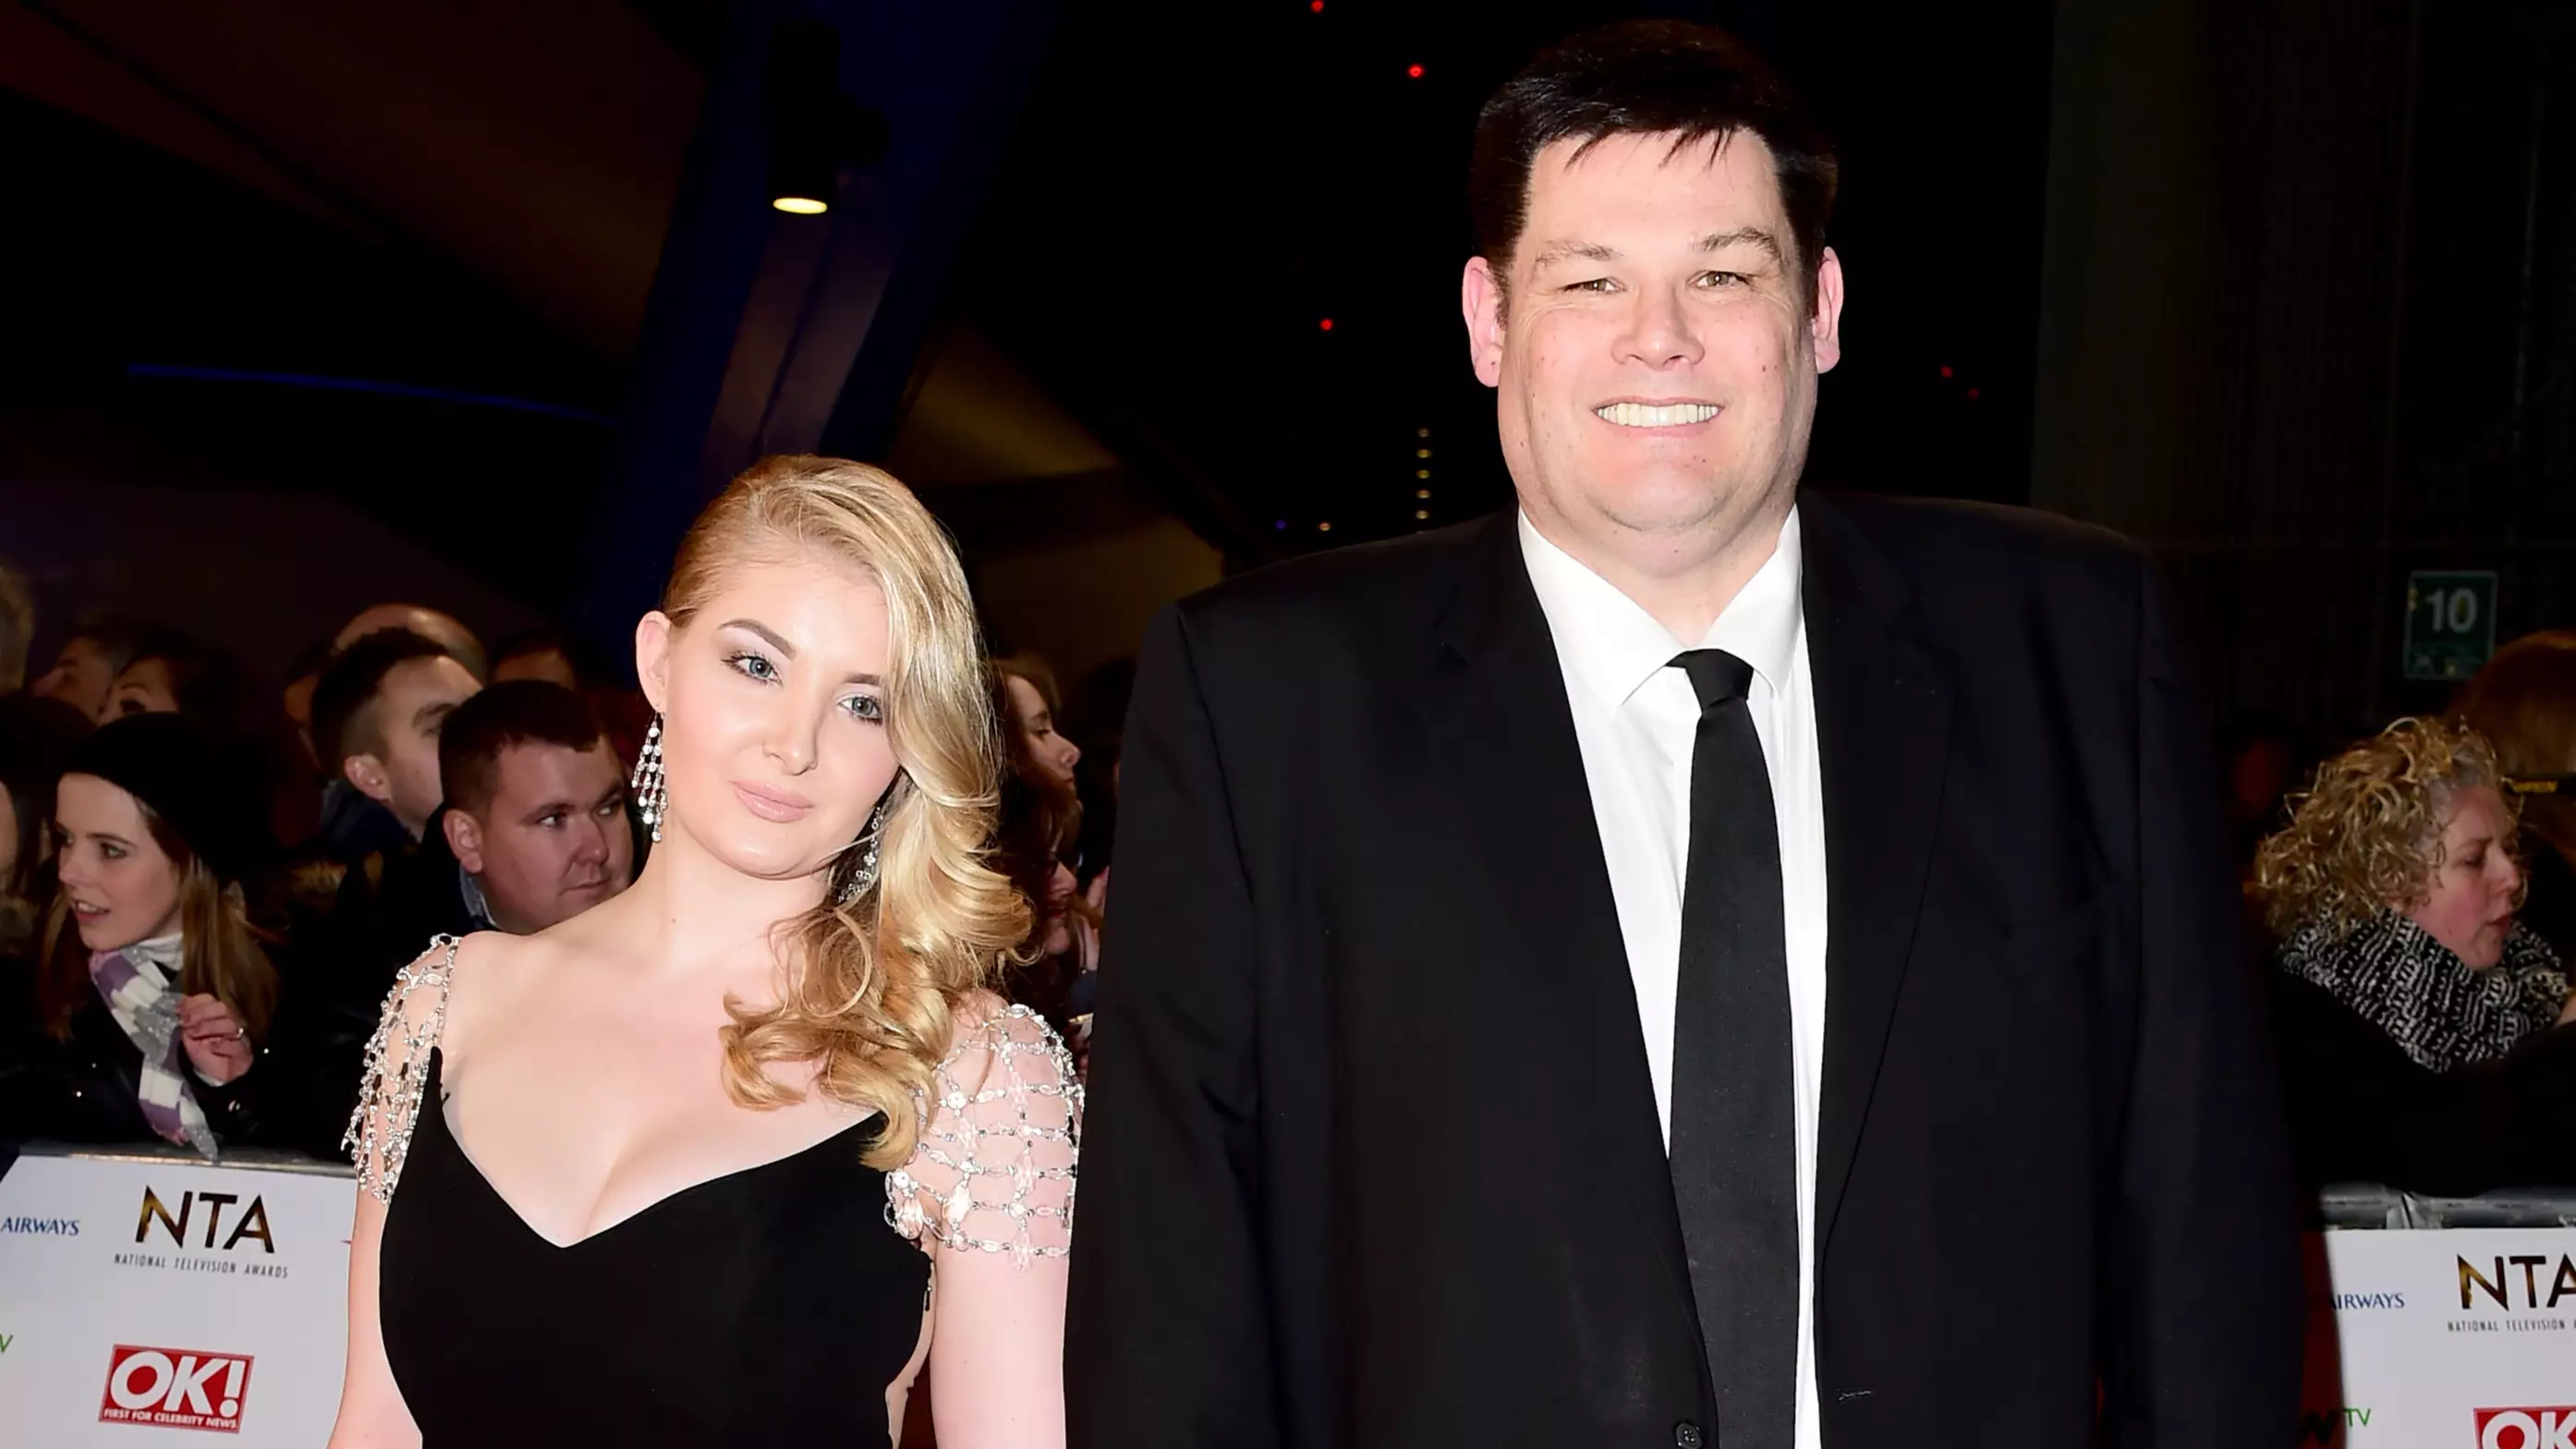 The Chase's Mark Labbett Splits From Wife After Failed Open Marriage